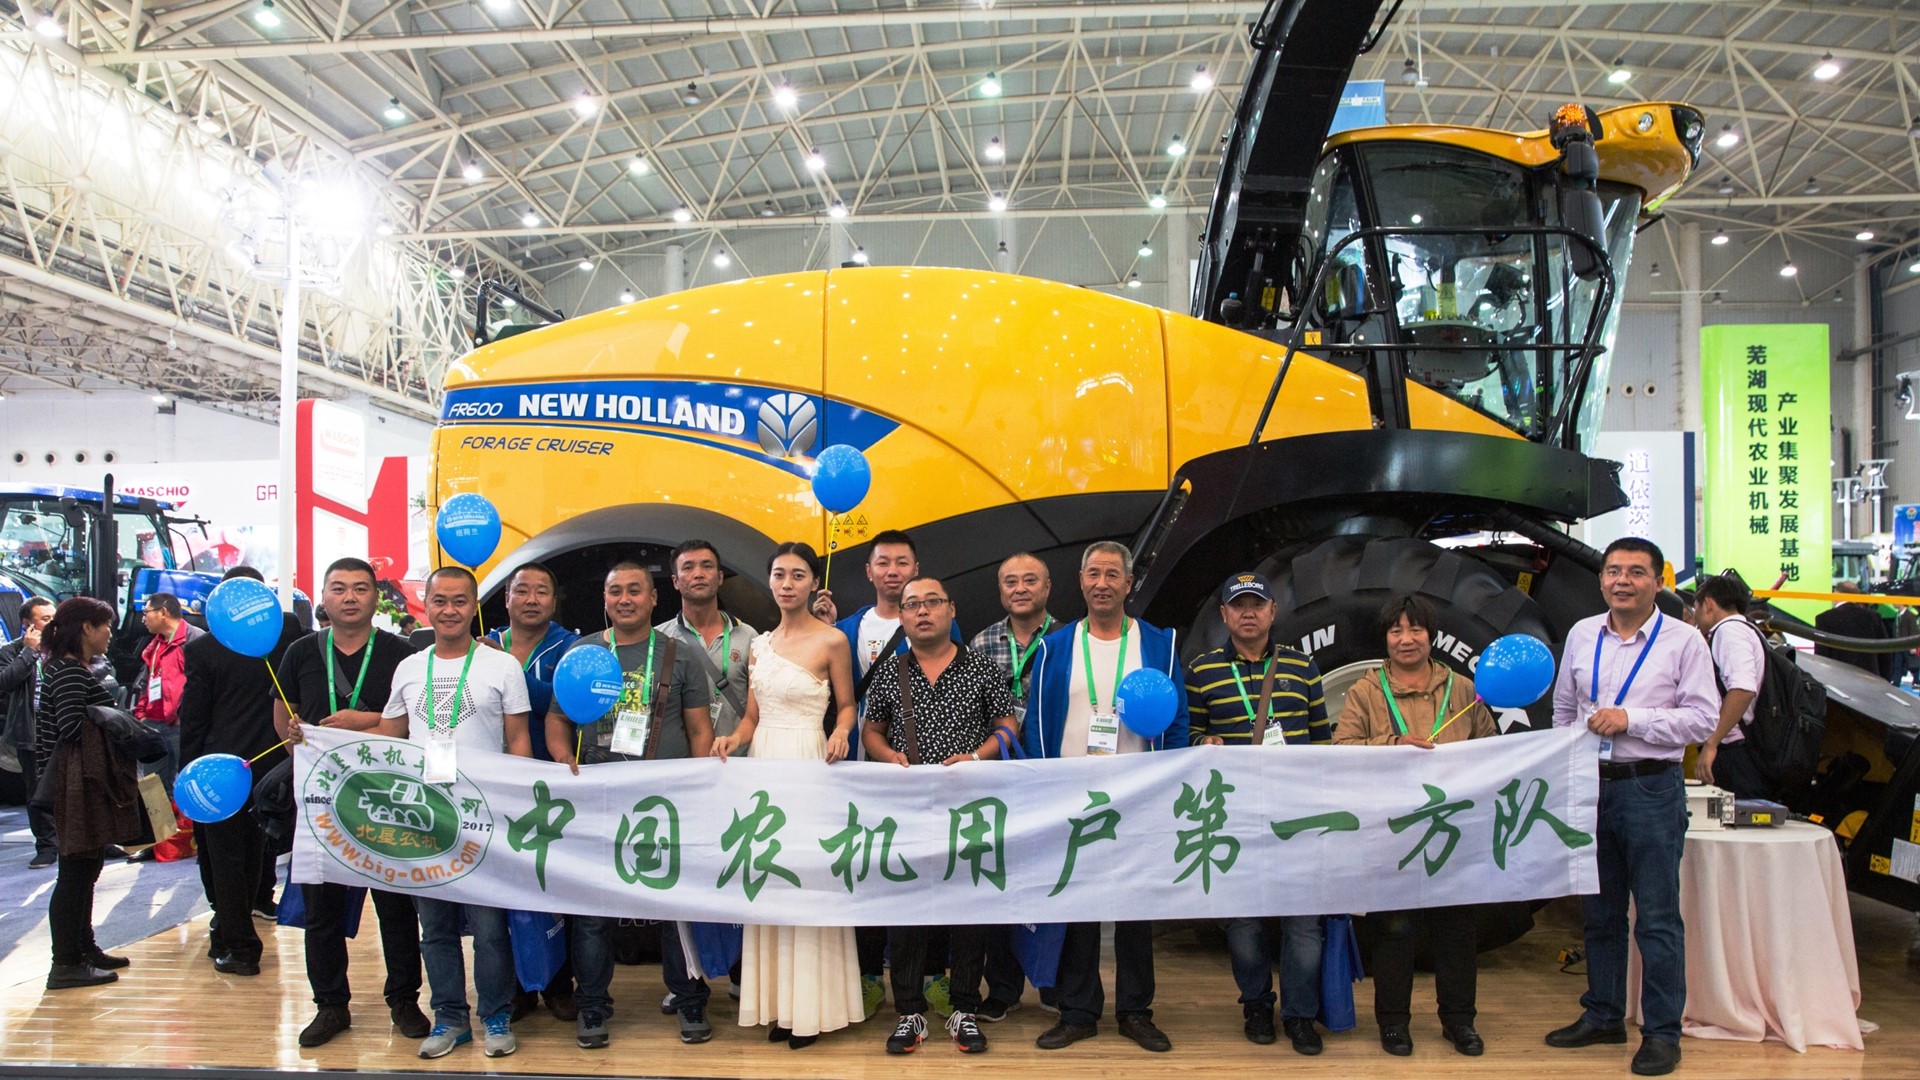 New Holland Agriculture at CIAME 2017